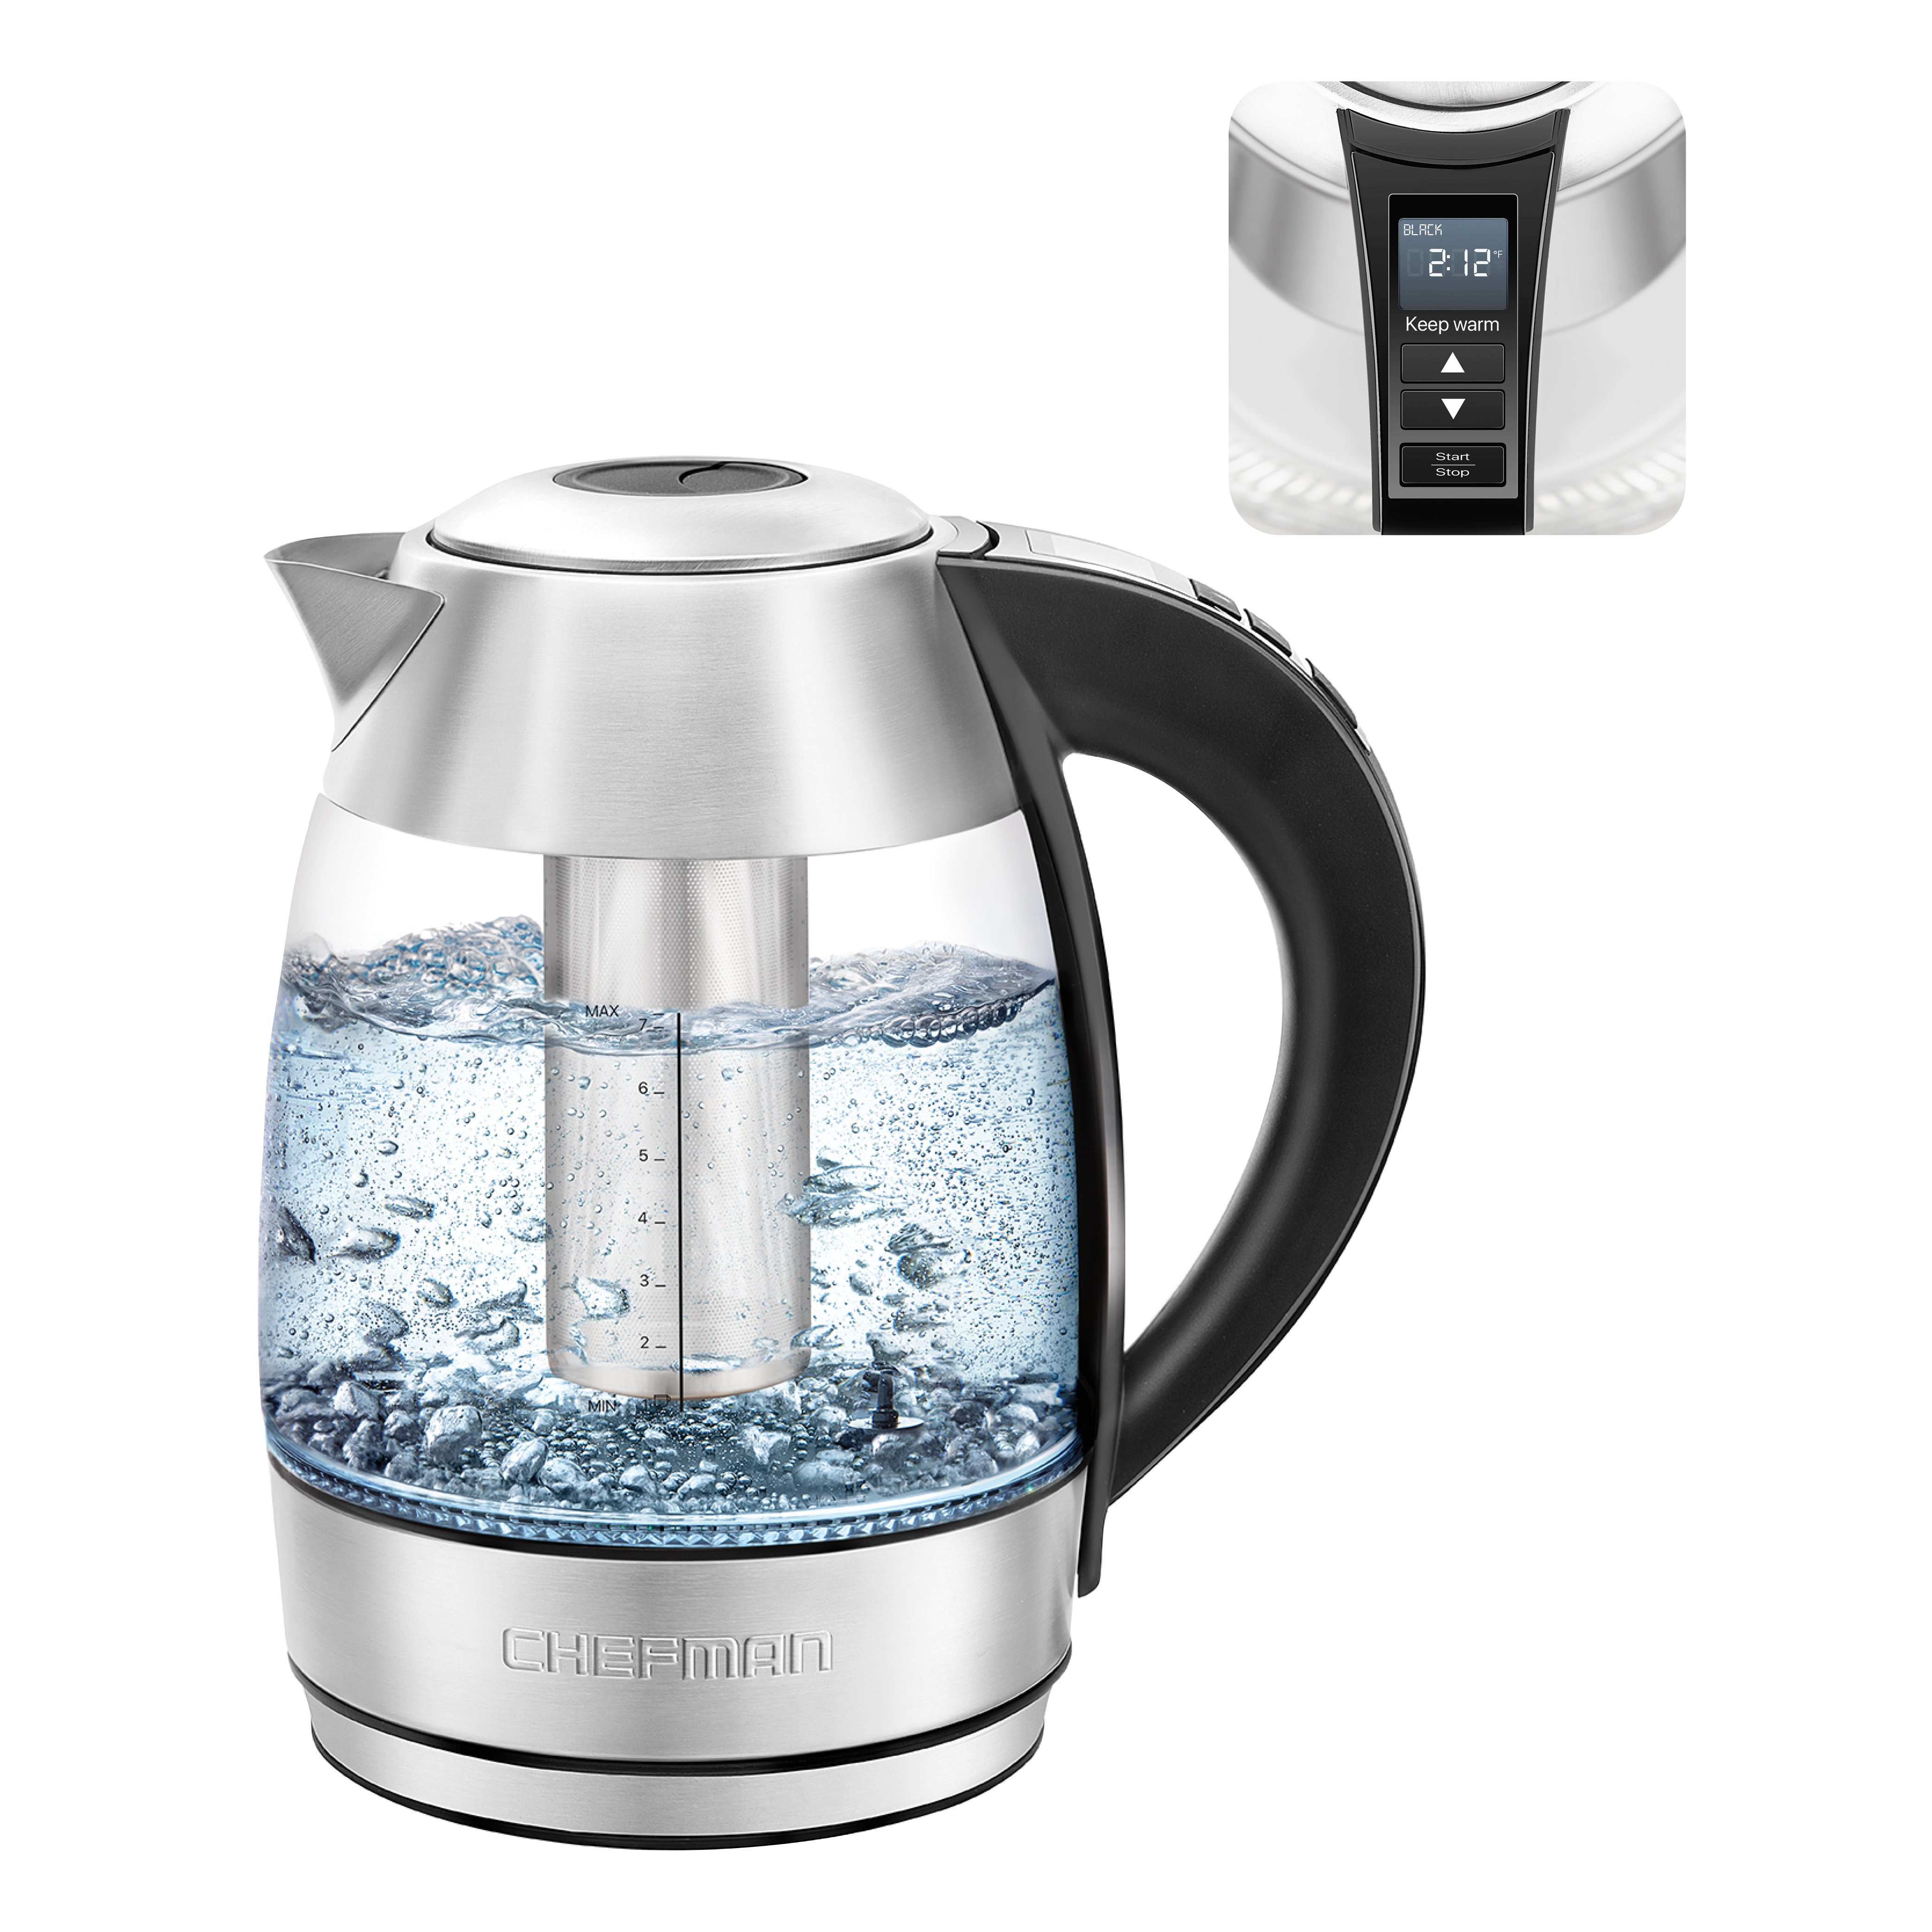 Chefman Digital Electric Glass Kettle, No.1 Kettle Manufacturer, Removable  Tea Infuser Included, 8 Presets & Programmable Temperature Control, Auto